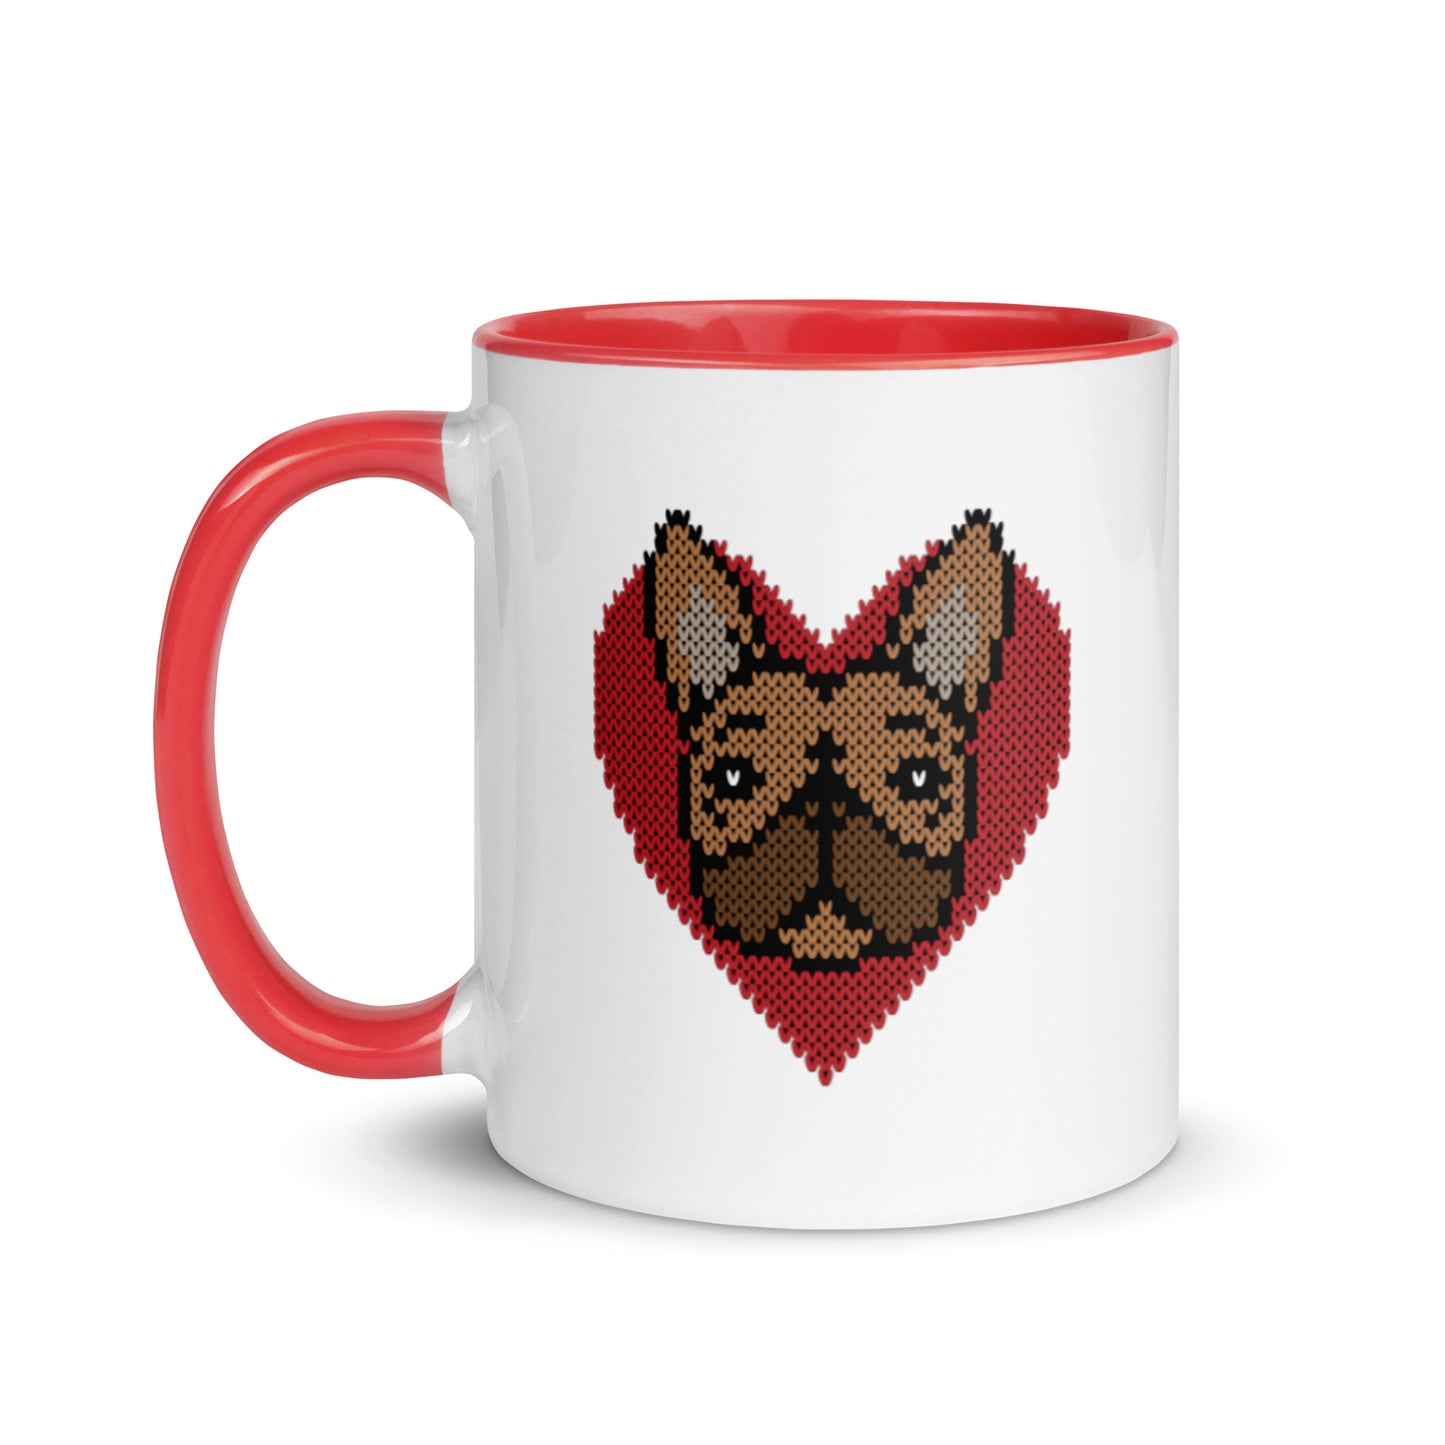 SWEETIE Mug Frenchie Red Fawn